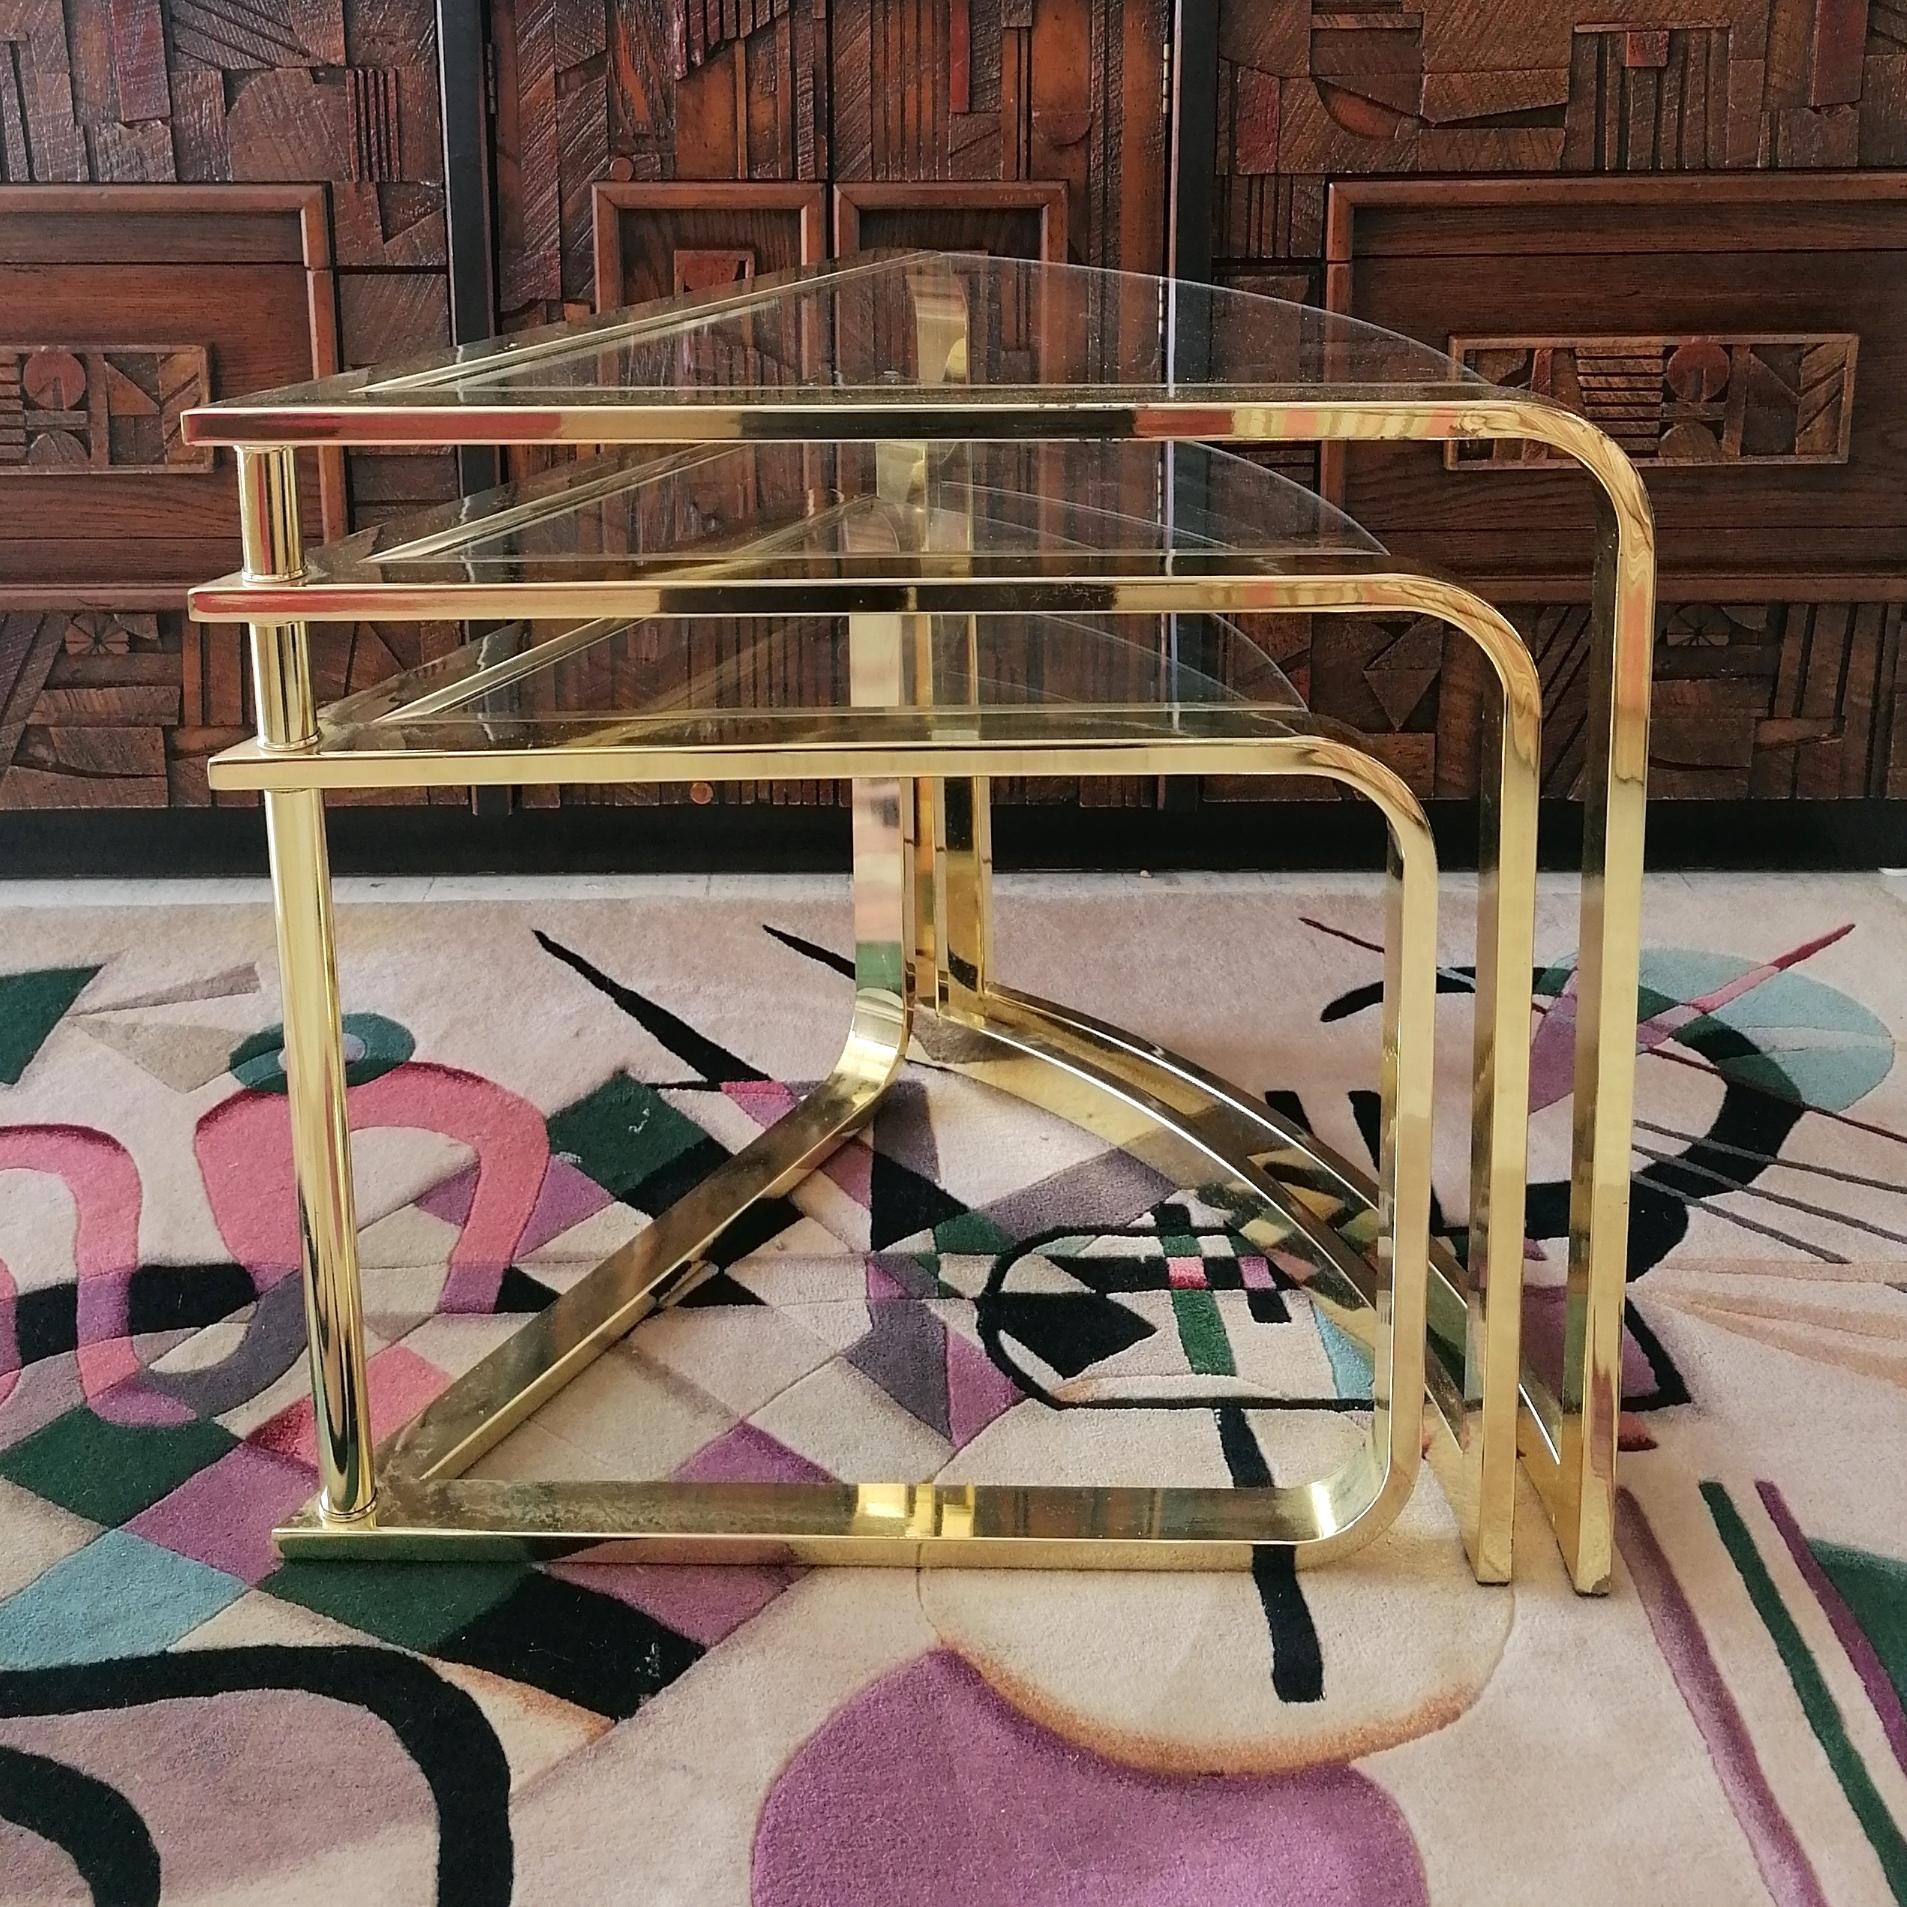 Rare vintage expanding three tier coffee table by Design Institute of America (DIA), 1980s. The 3 wedge-shaped tables are on a central pivot, enabling them to be nested together, or spread out in a circular shape.
Frames are shiny gold metal, with